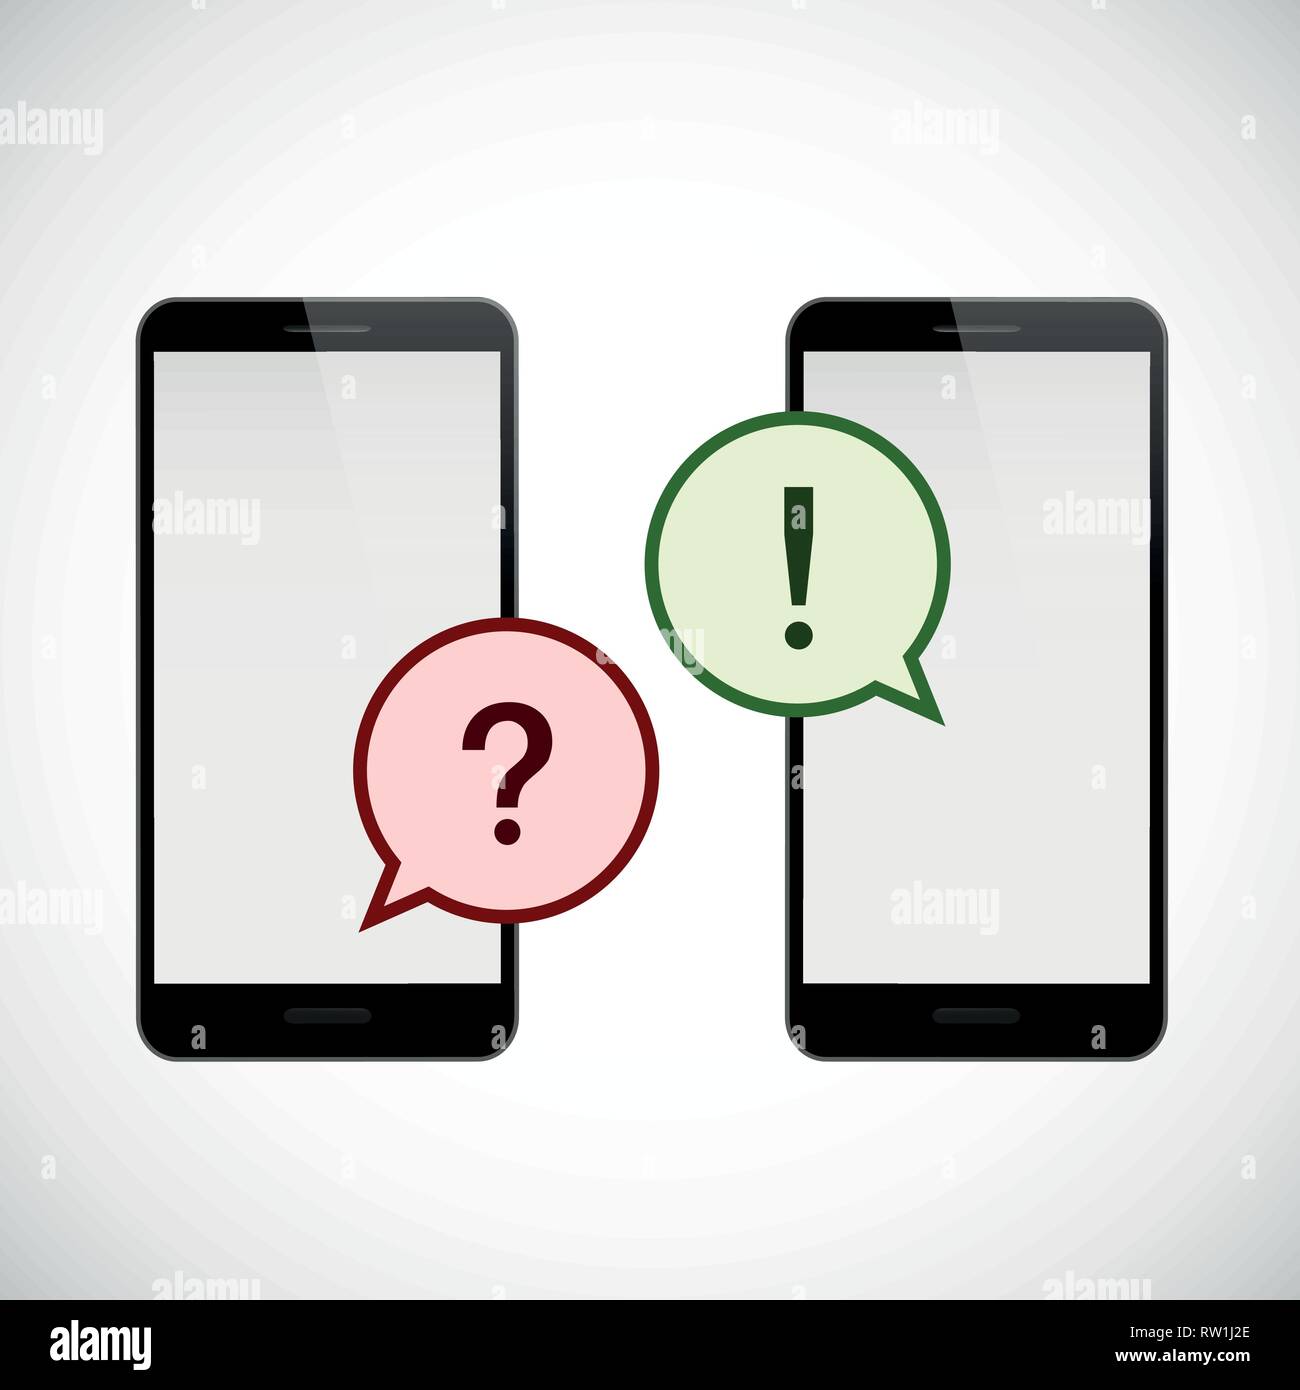 question and answer communication via smartphone vector illustration EPS10 Stock Vector